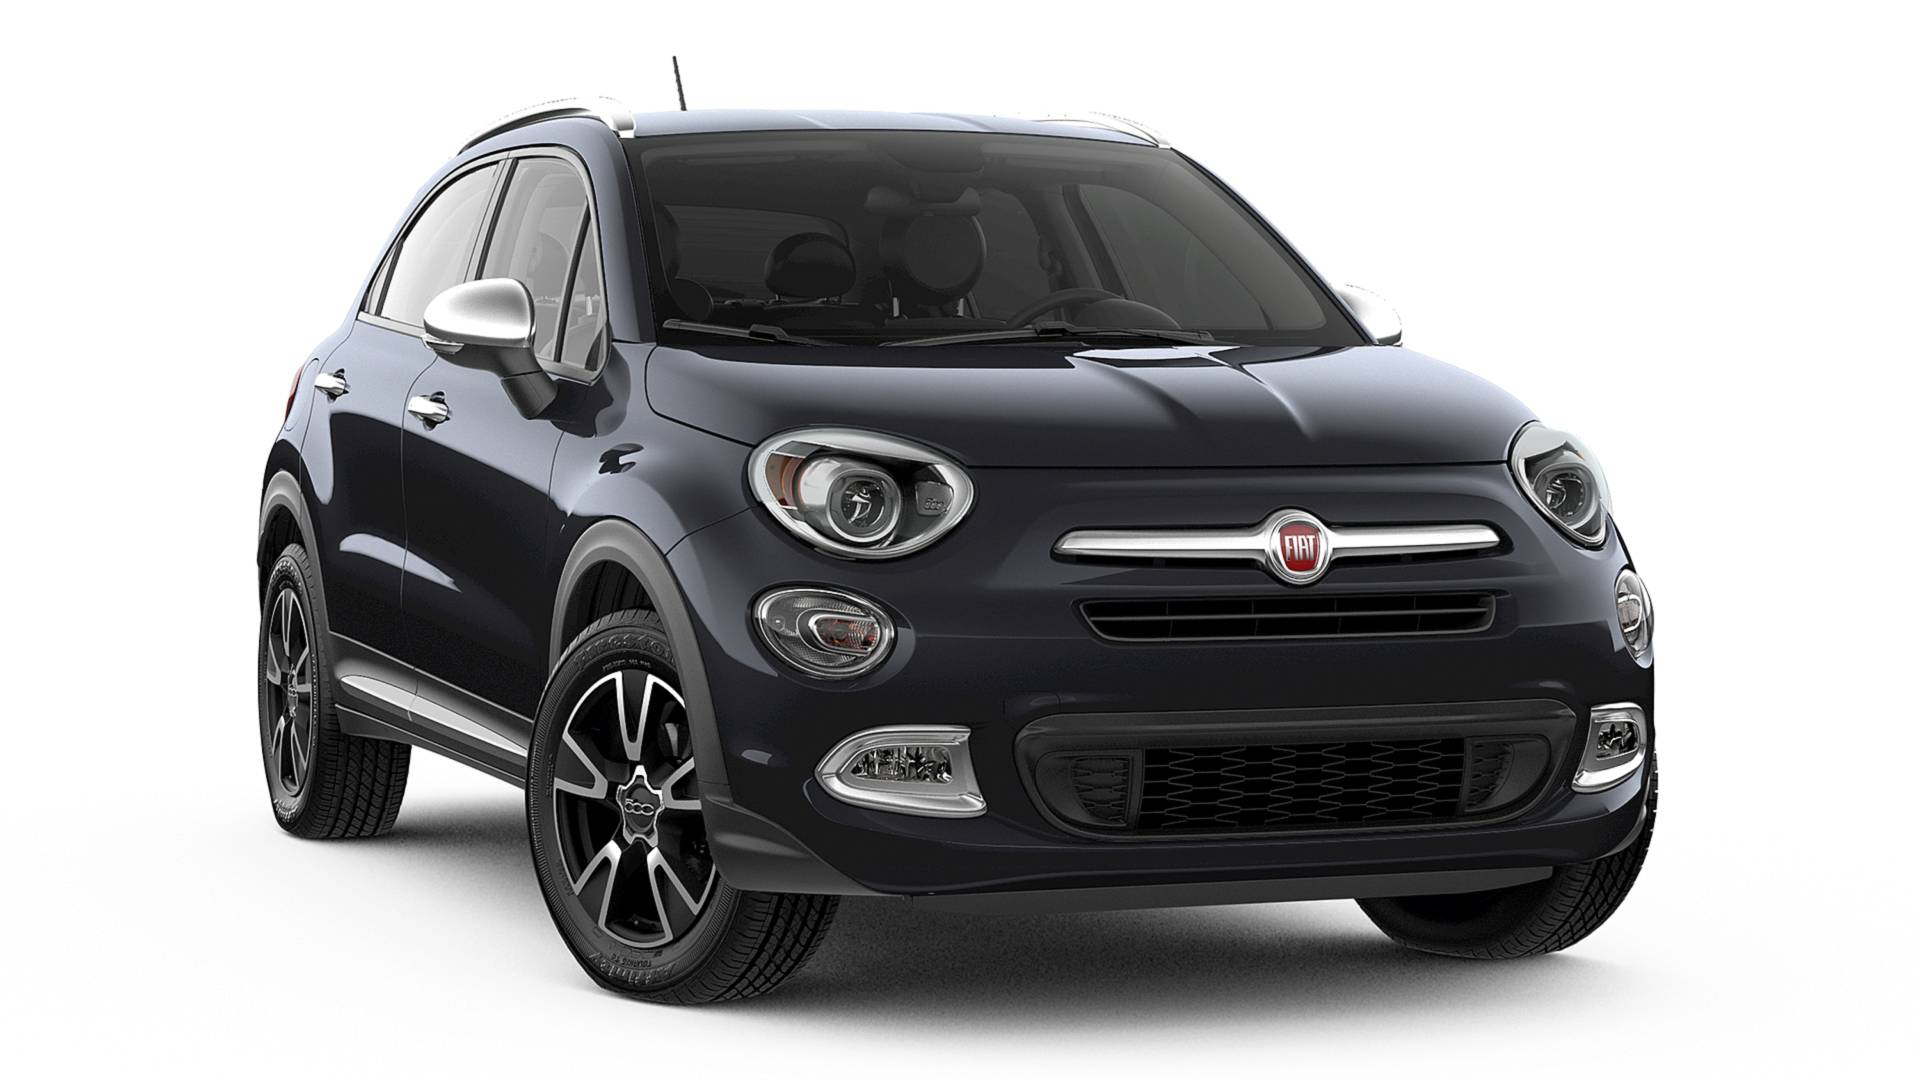 2018 Fiat 500X, 500L Blinged-Out With More Chrome